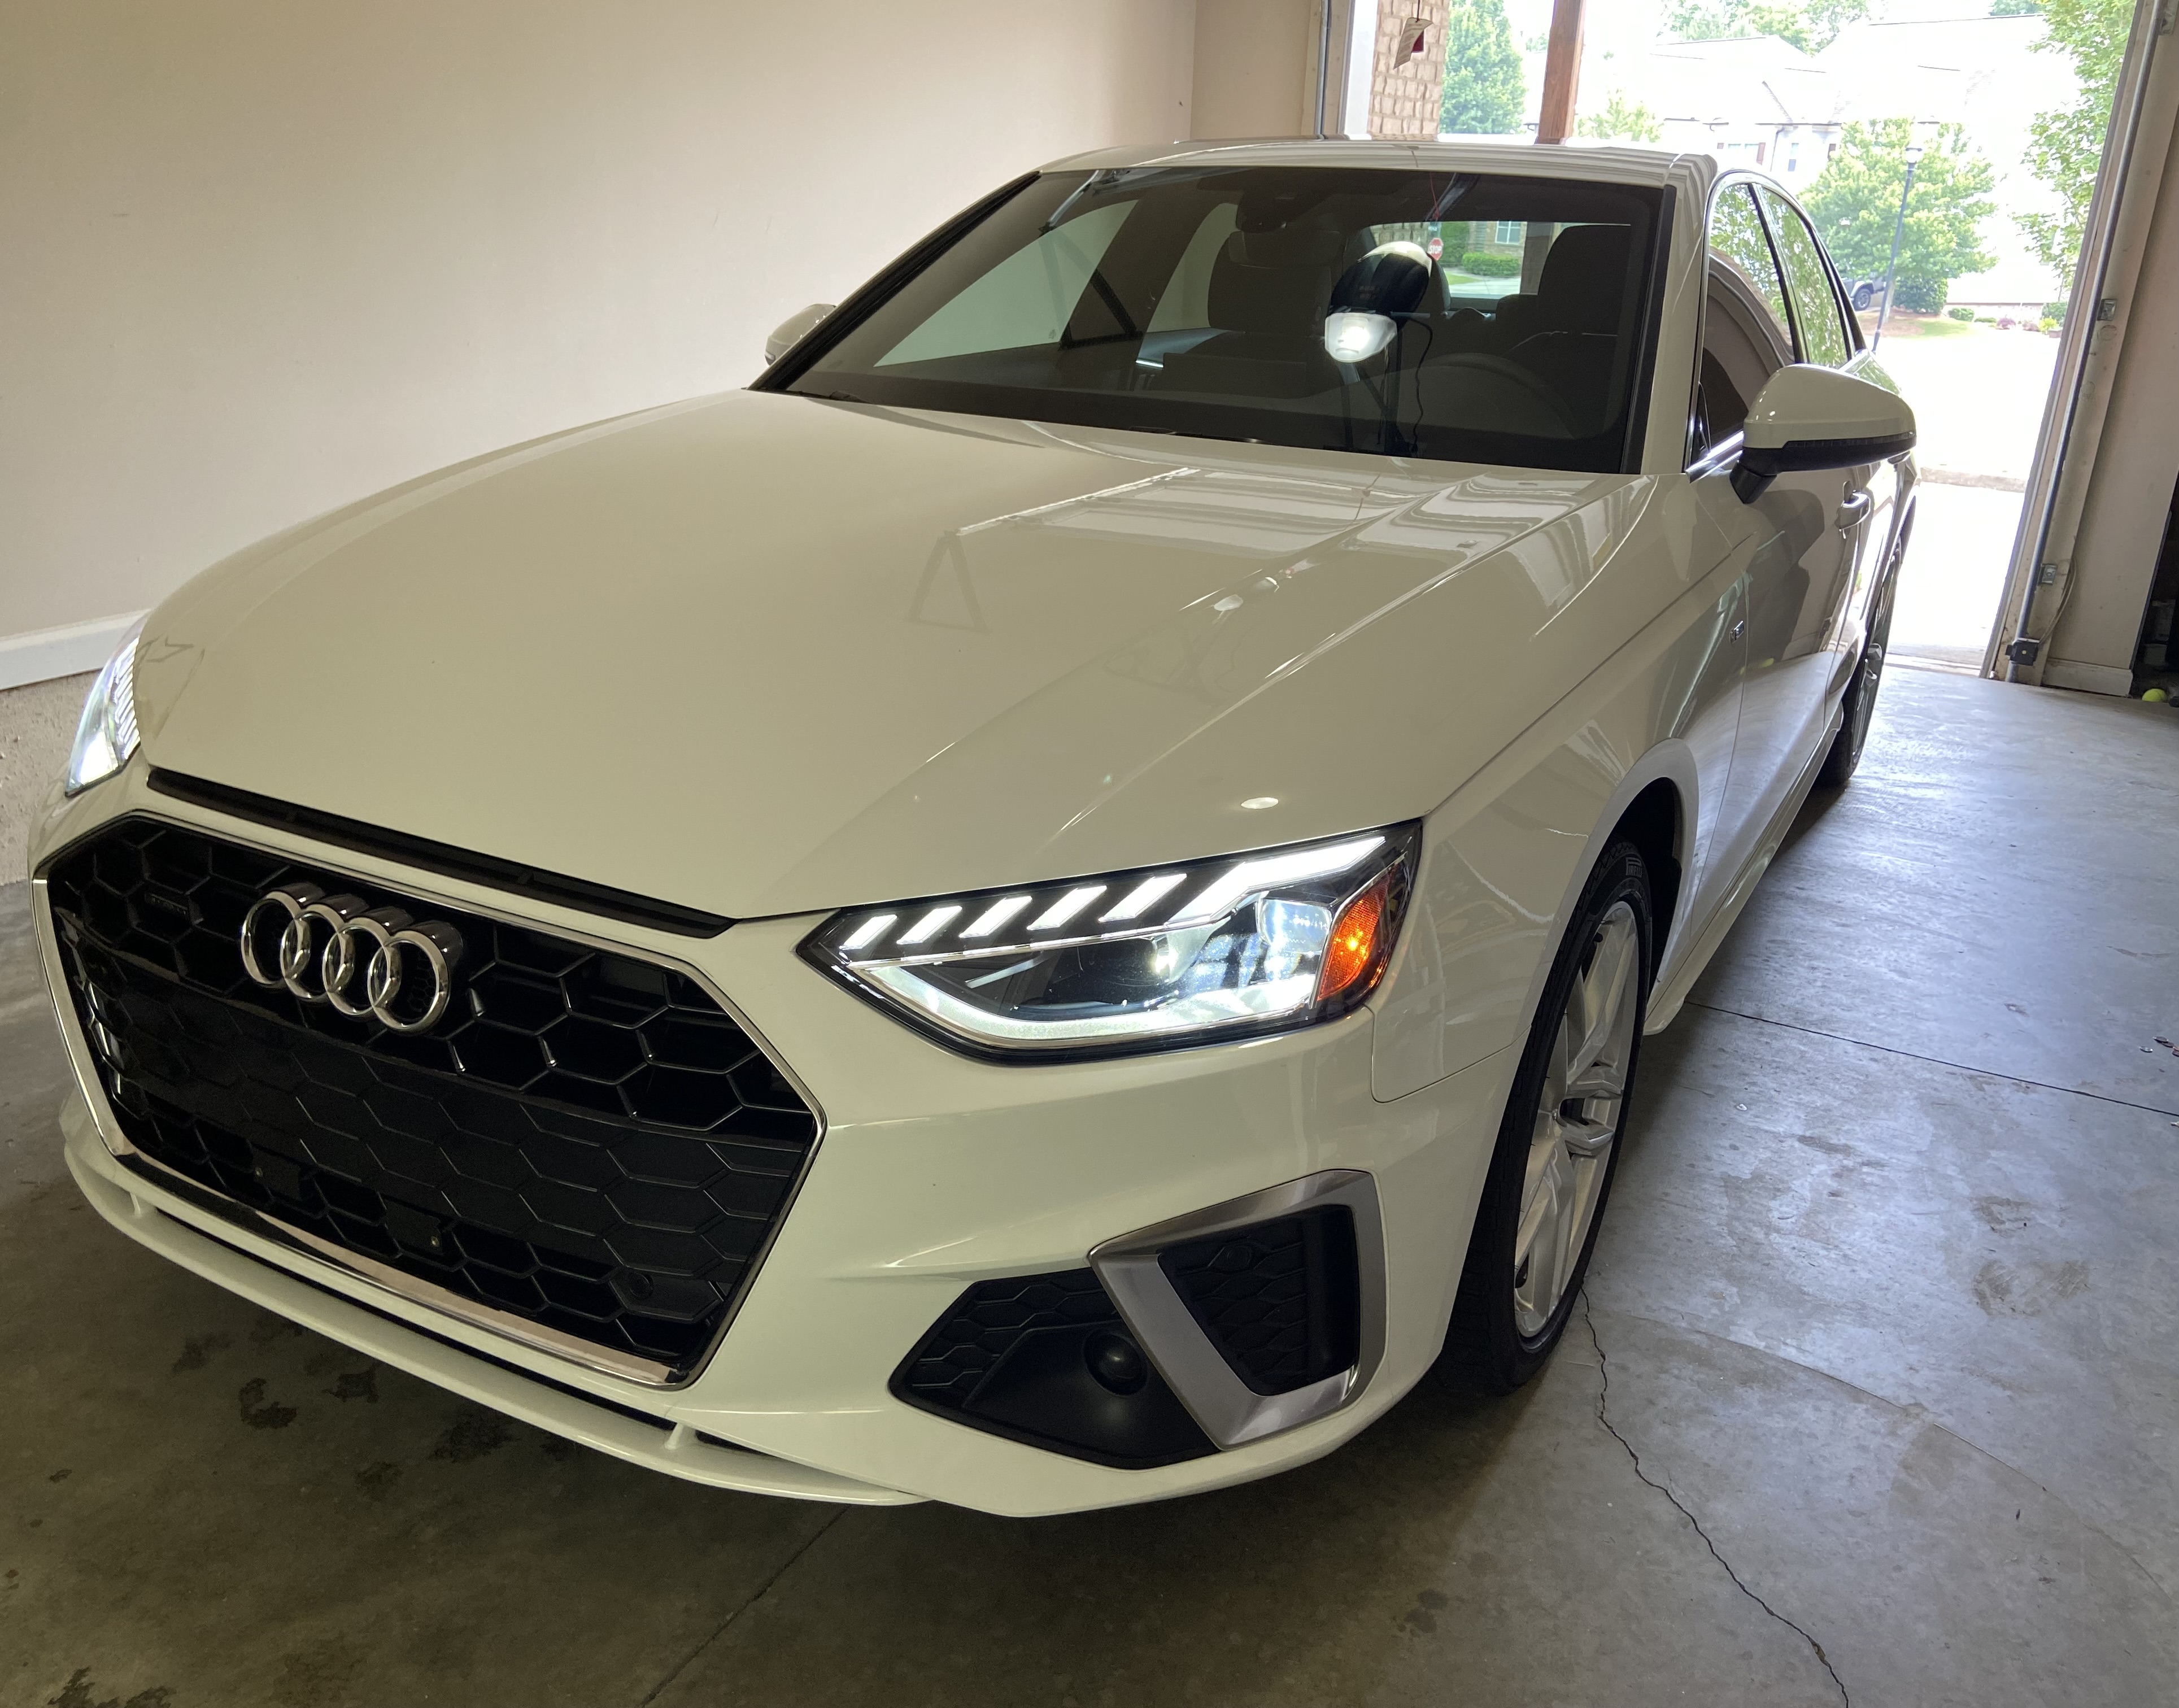 2020 Audi A4 Review - Autotrader